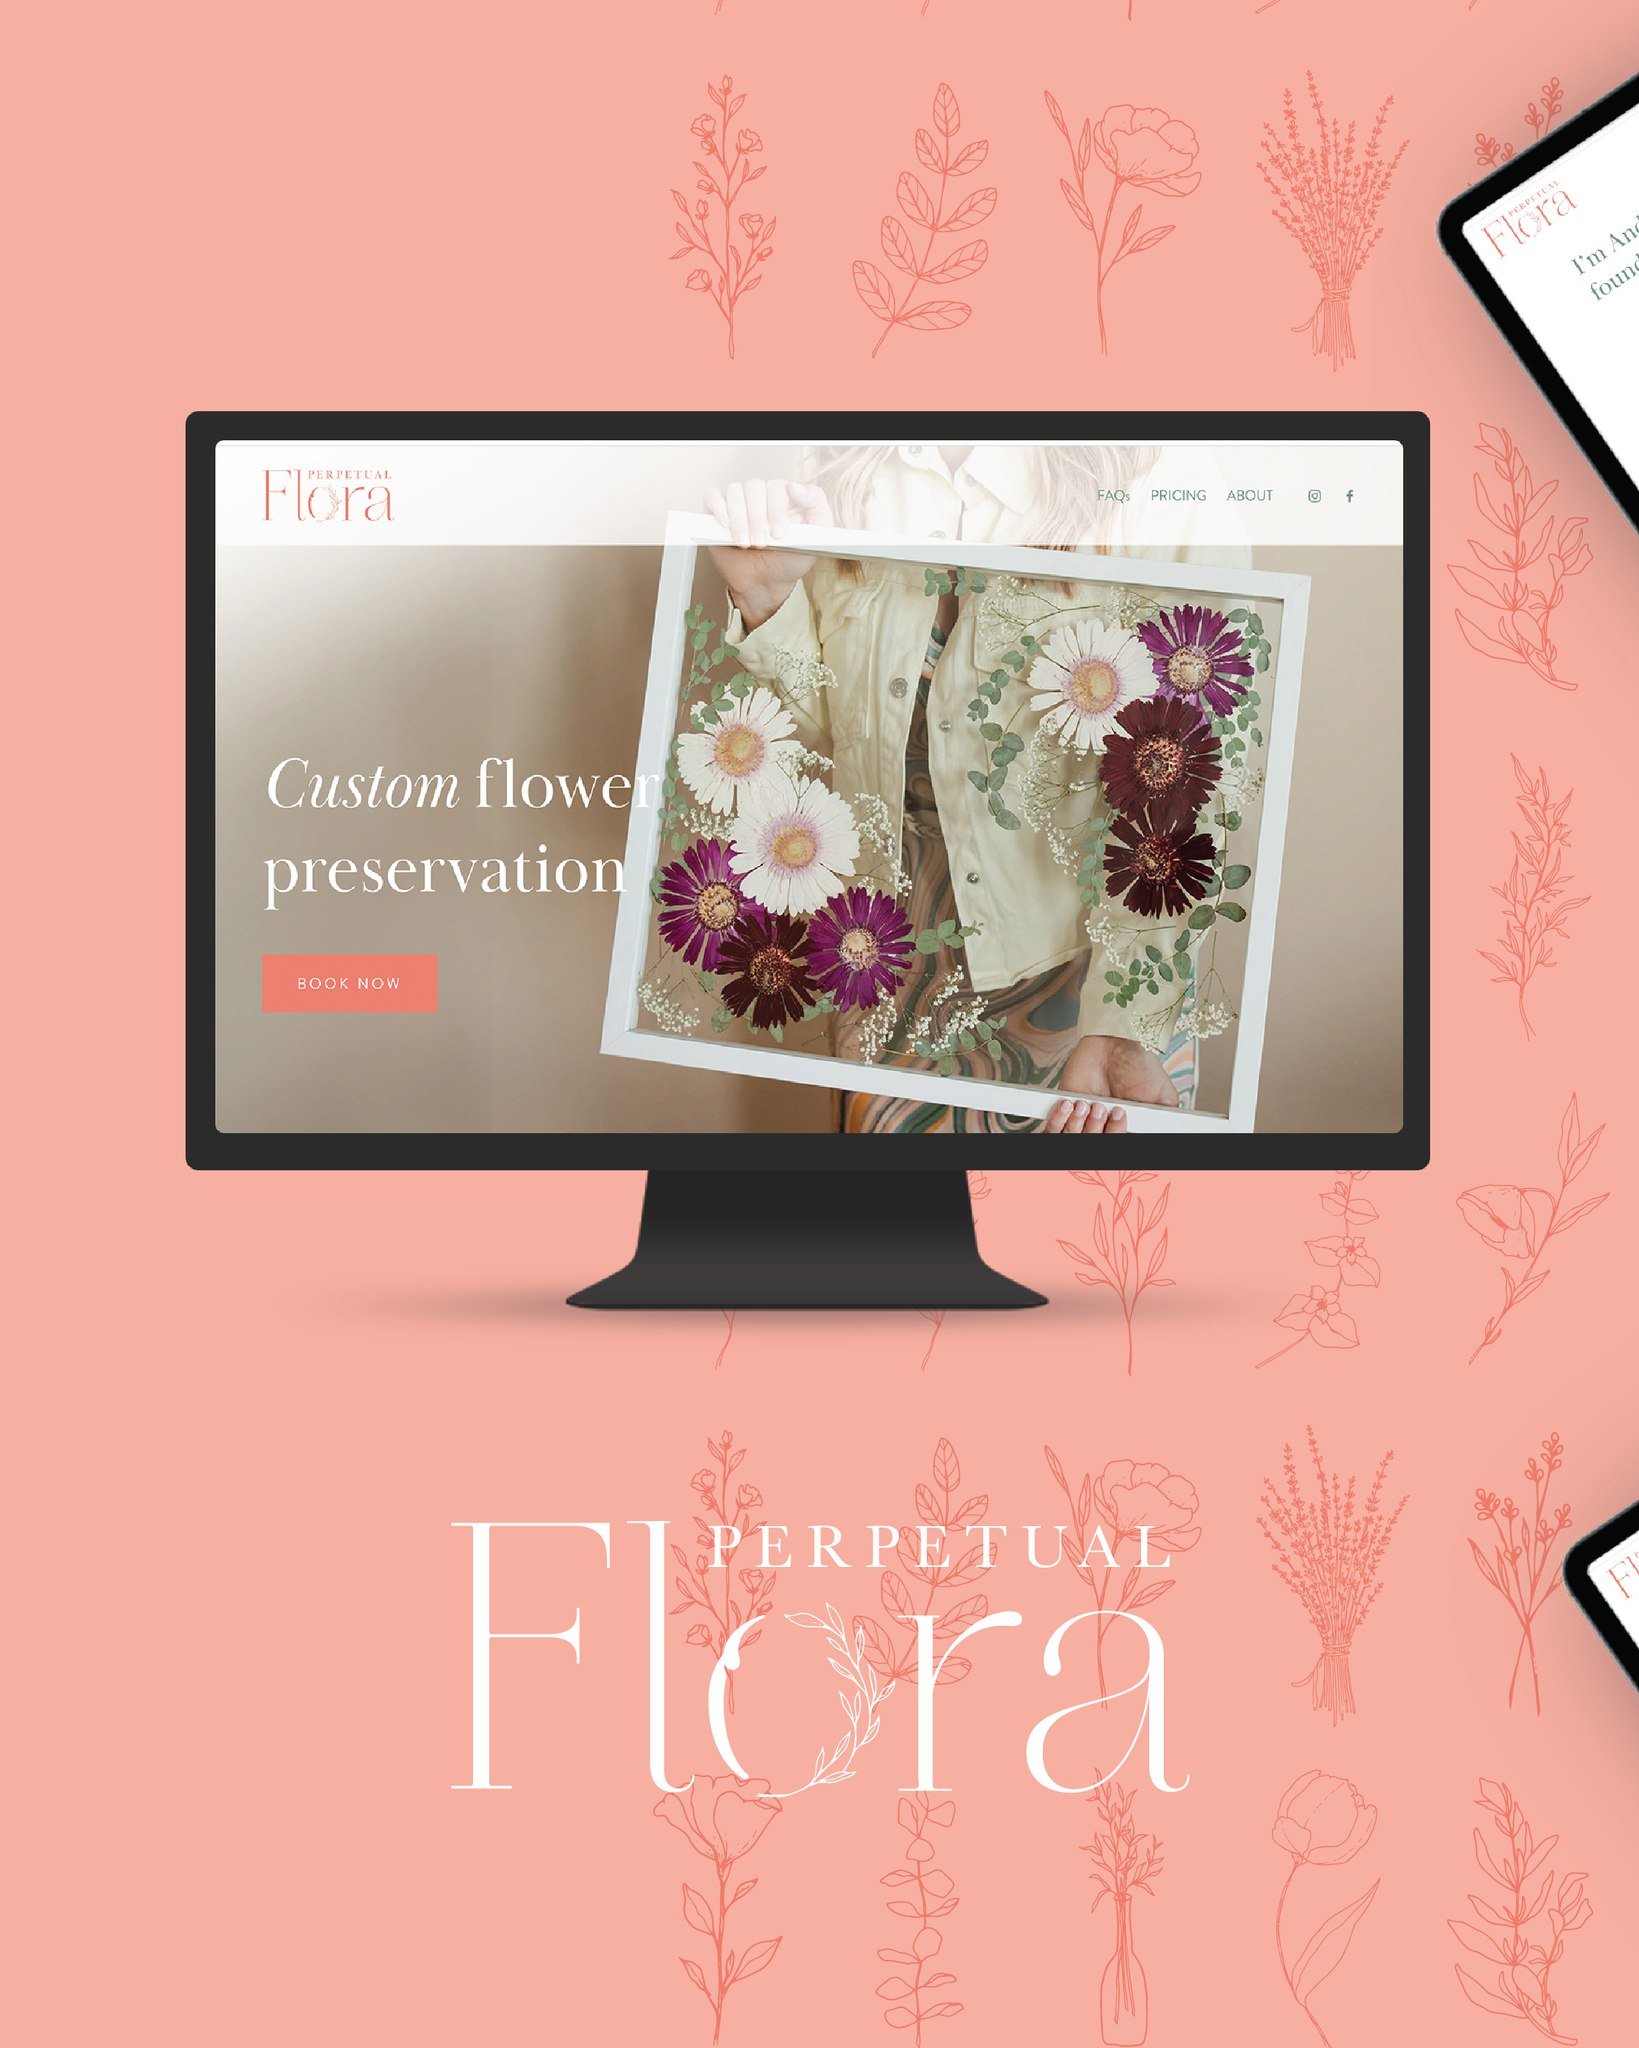 Its launch day for this brand new website for @perpetualflora ✨😎 

Photos 📸 @heathermariephotog